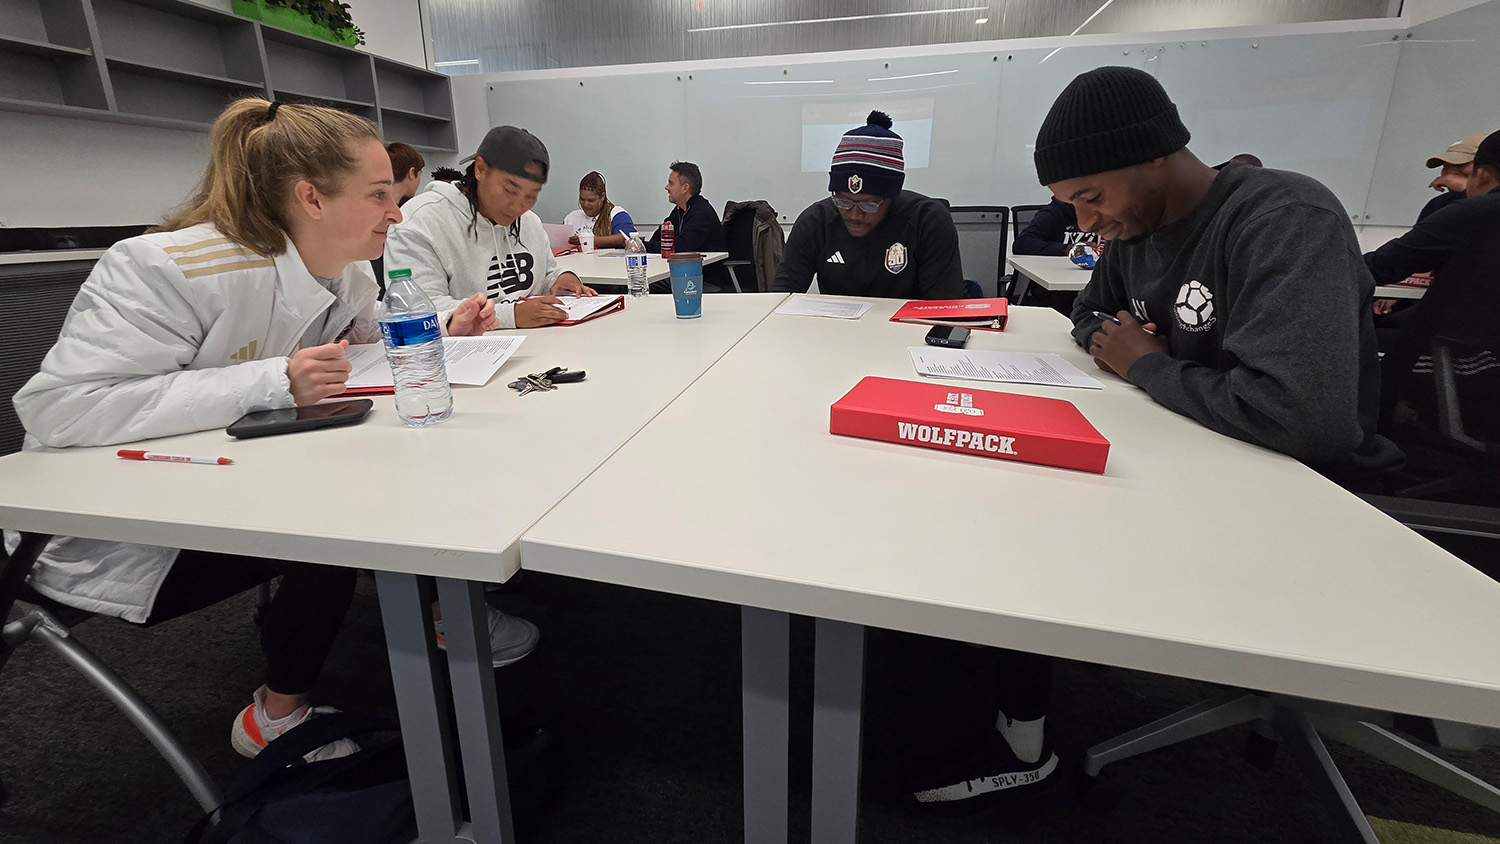 A group of people sitting at a table - Exchange Program Promotes Positive Youth Development Through Sports - College of Natural Resources at NC State University